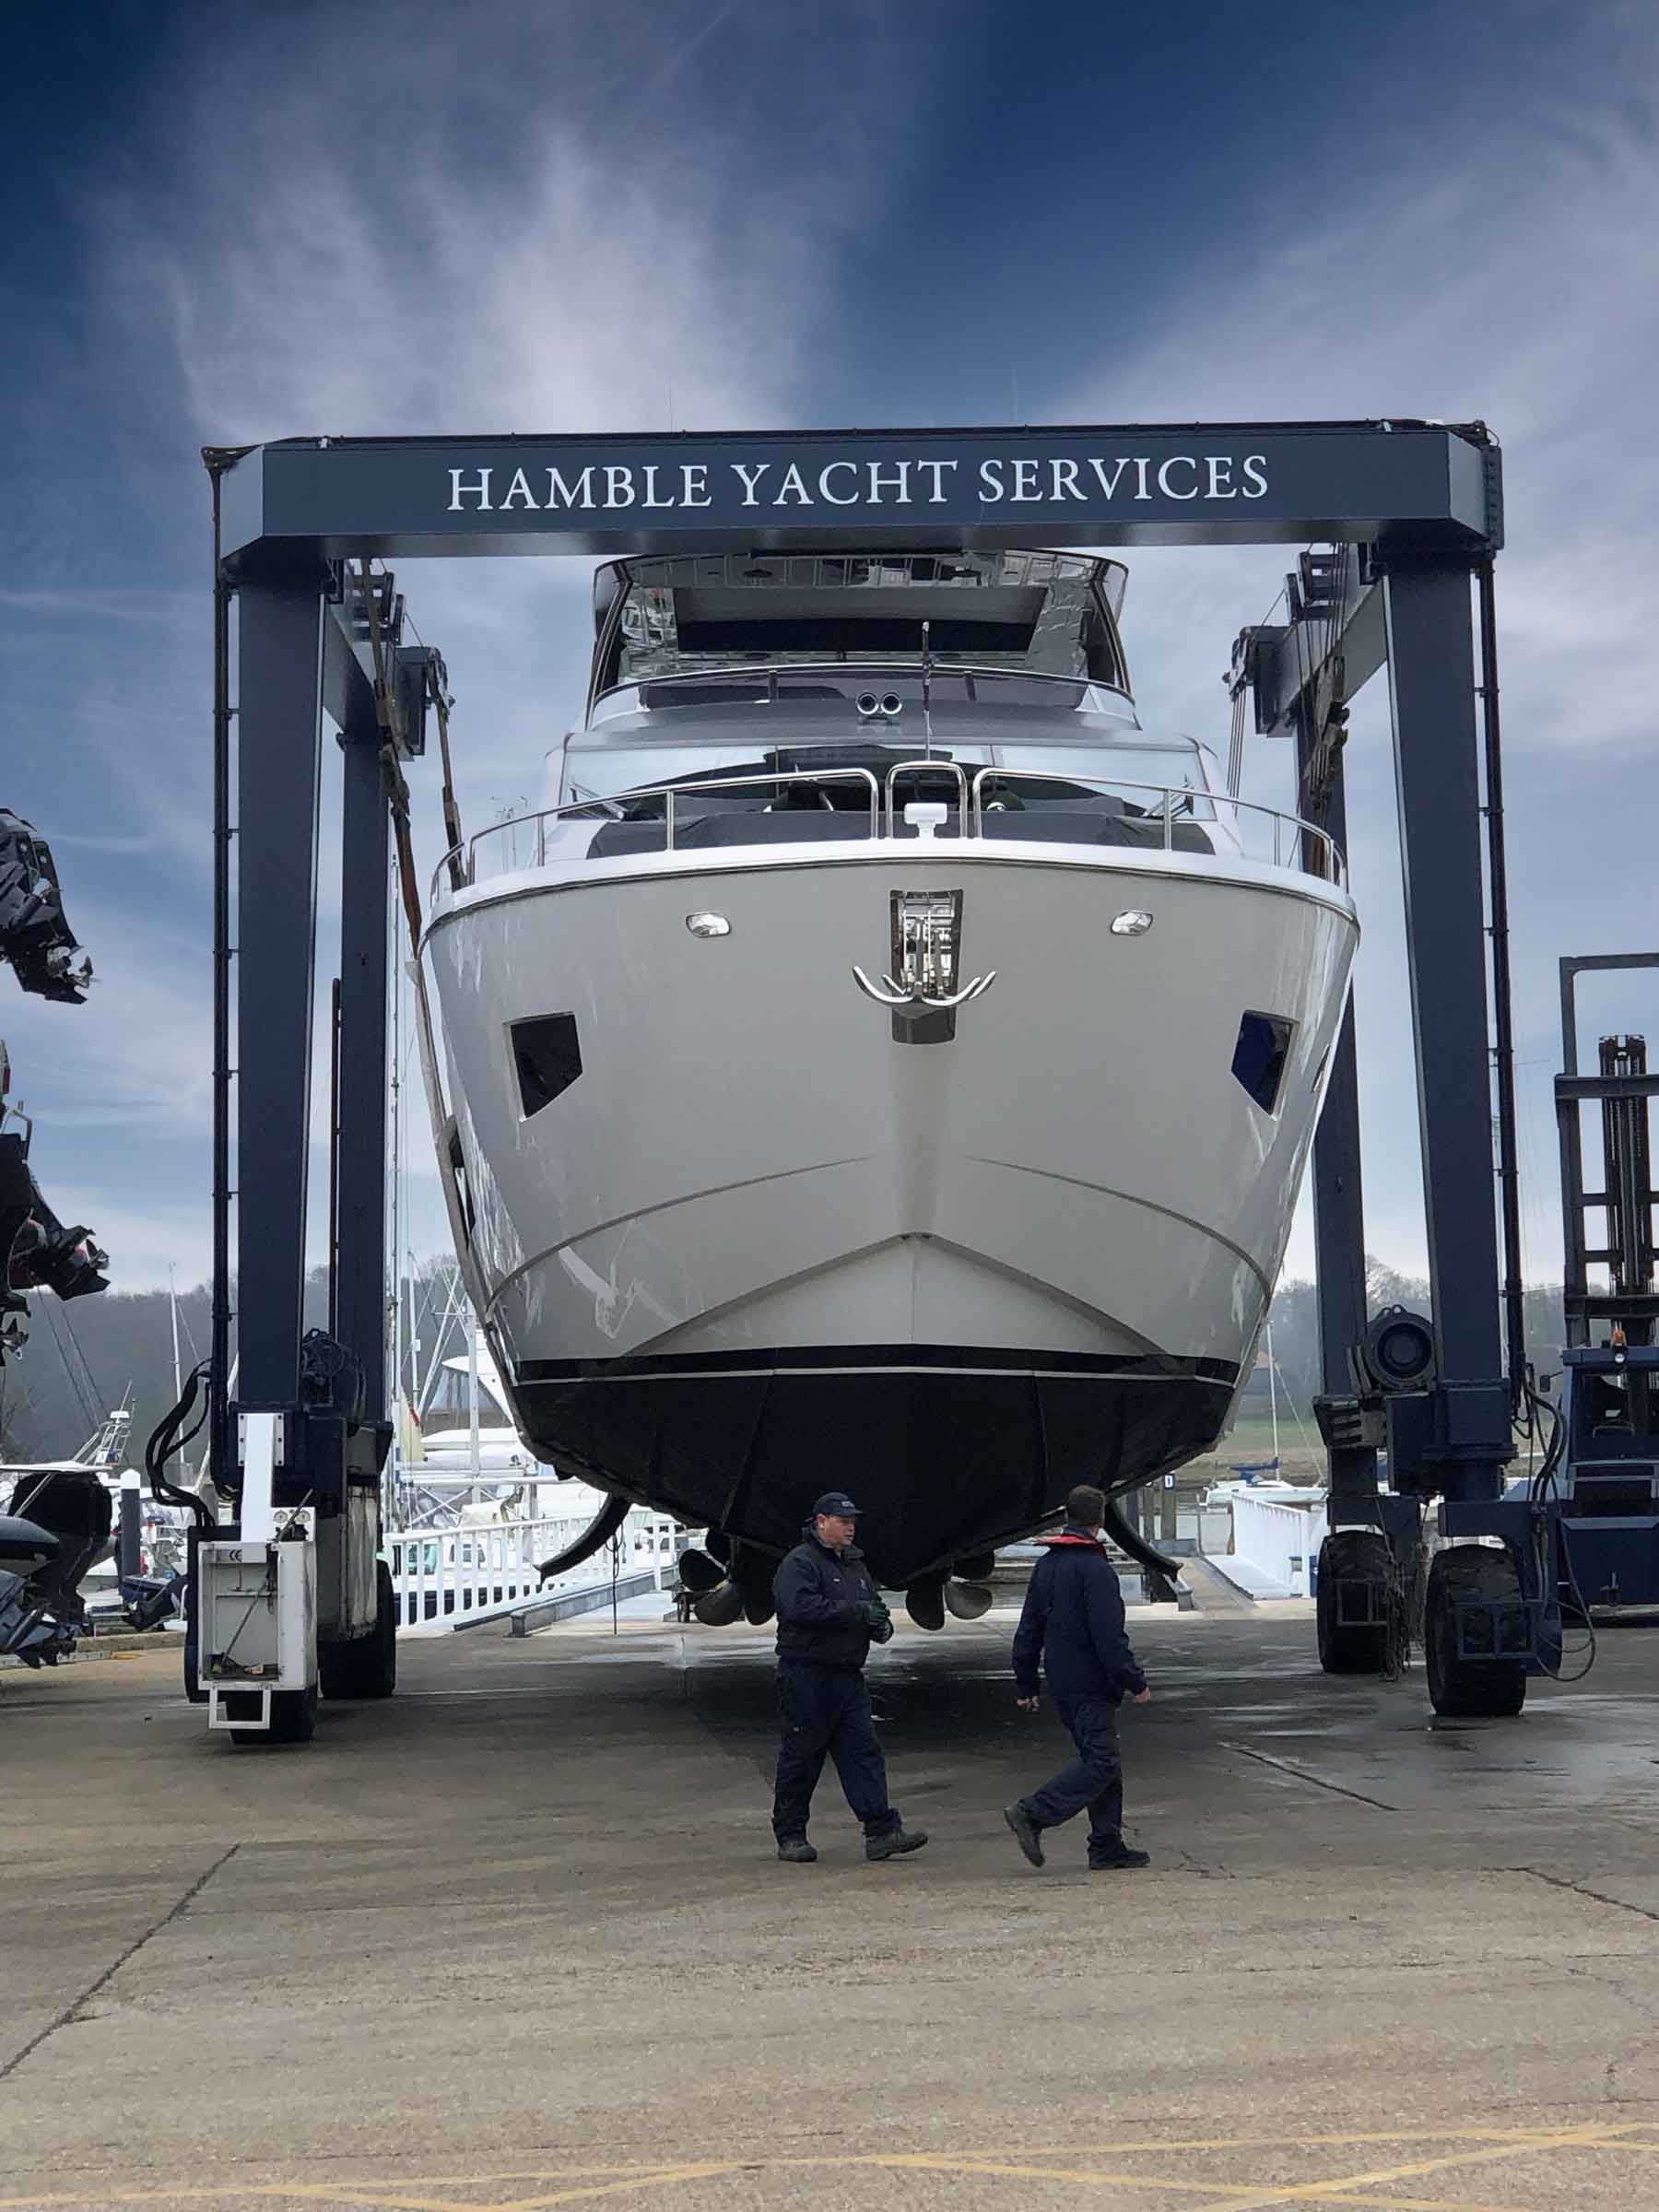 ancasta yacht services limited